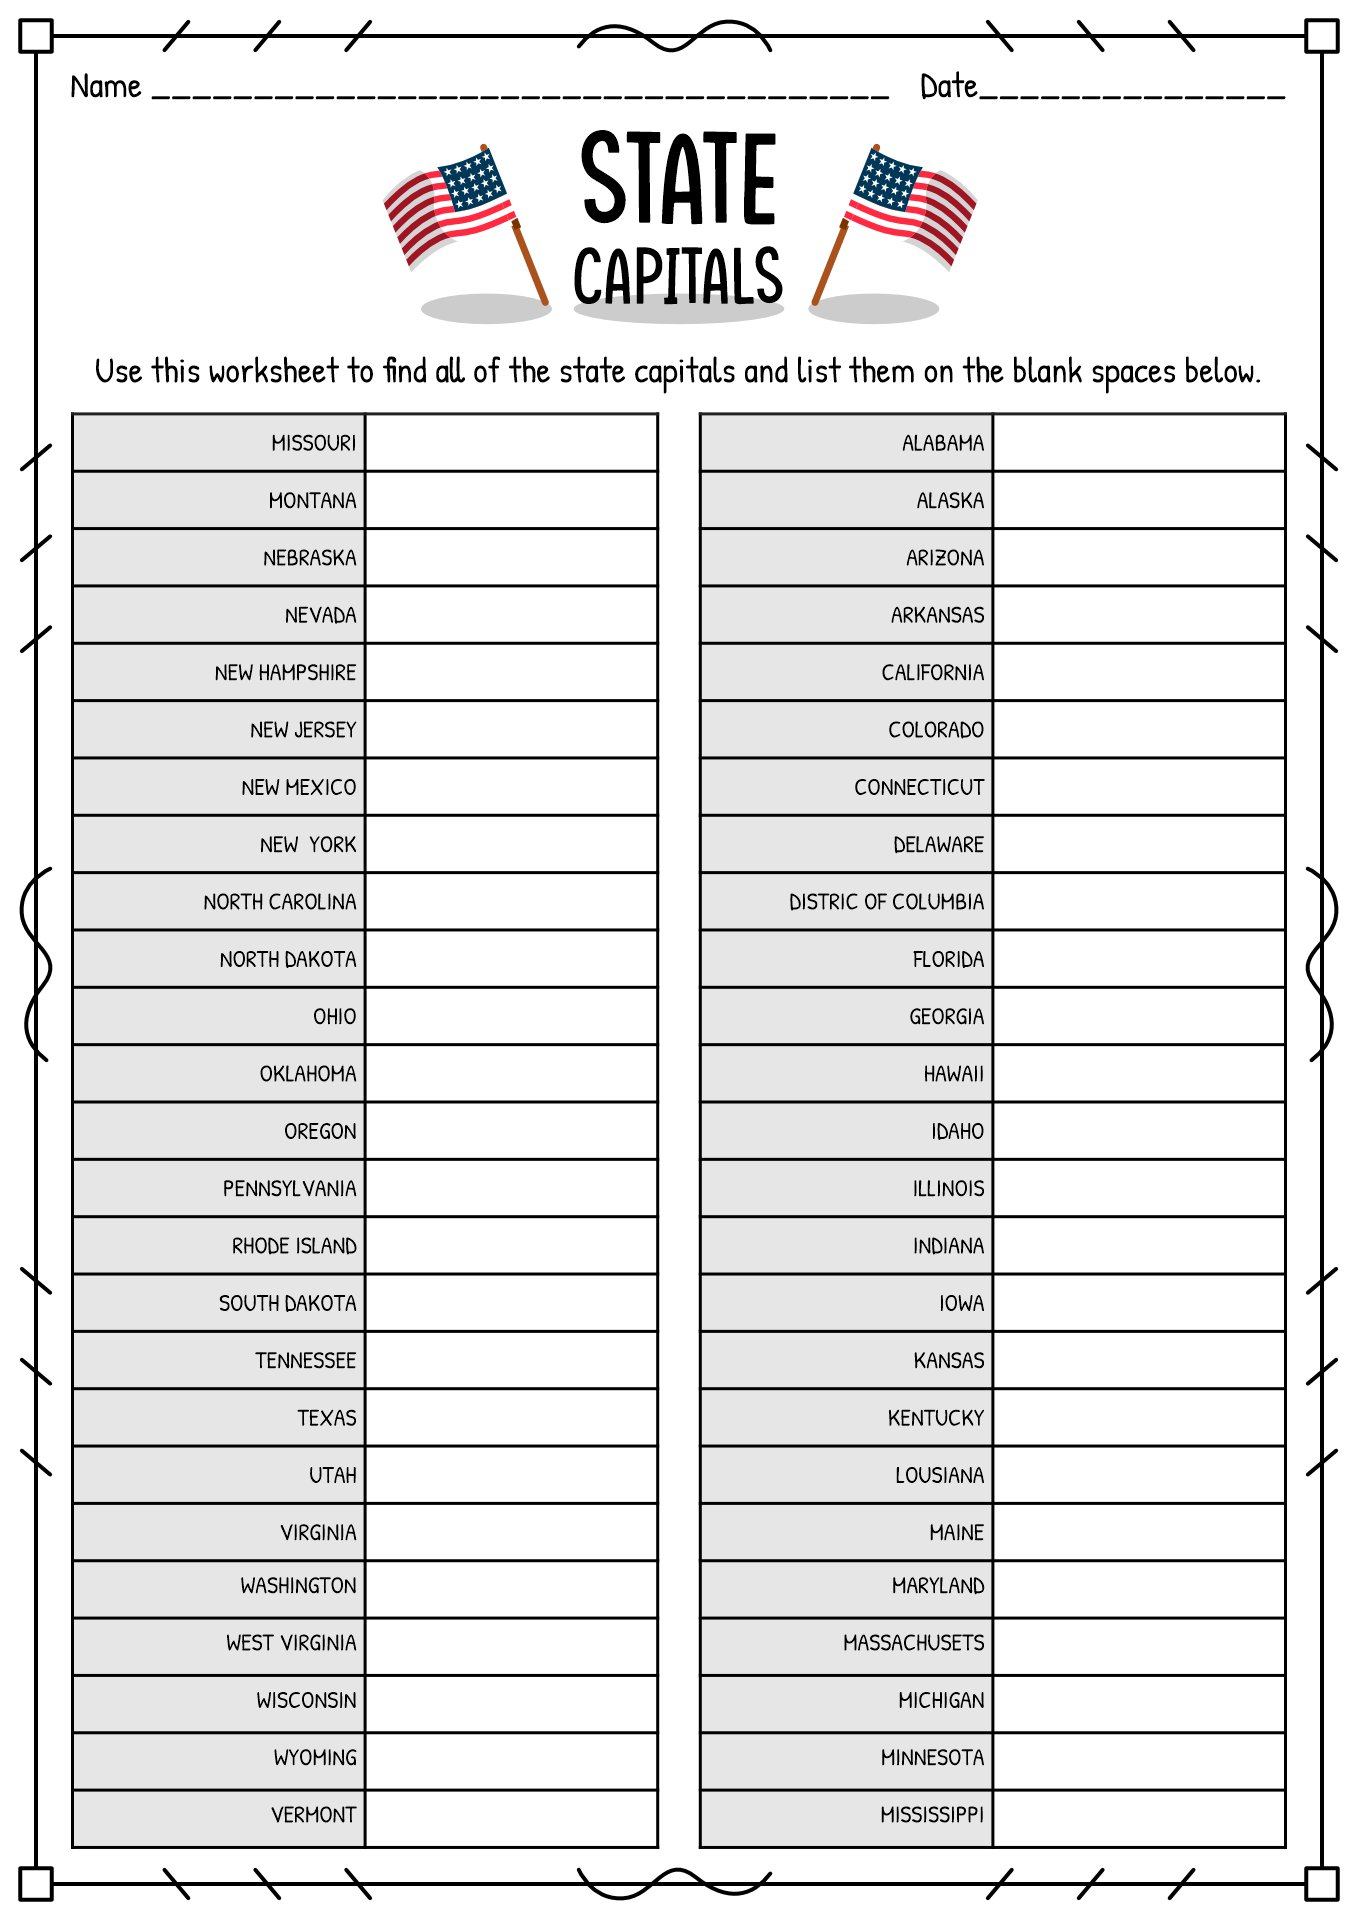 50 States and Capitals Worksheet